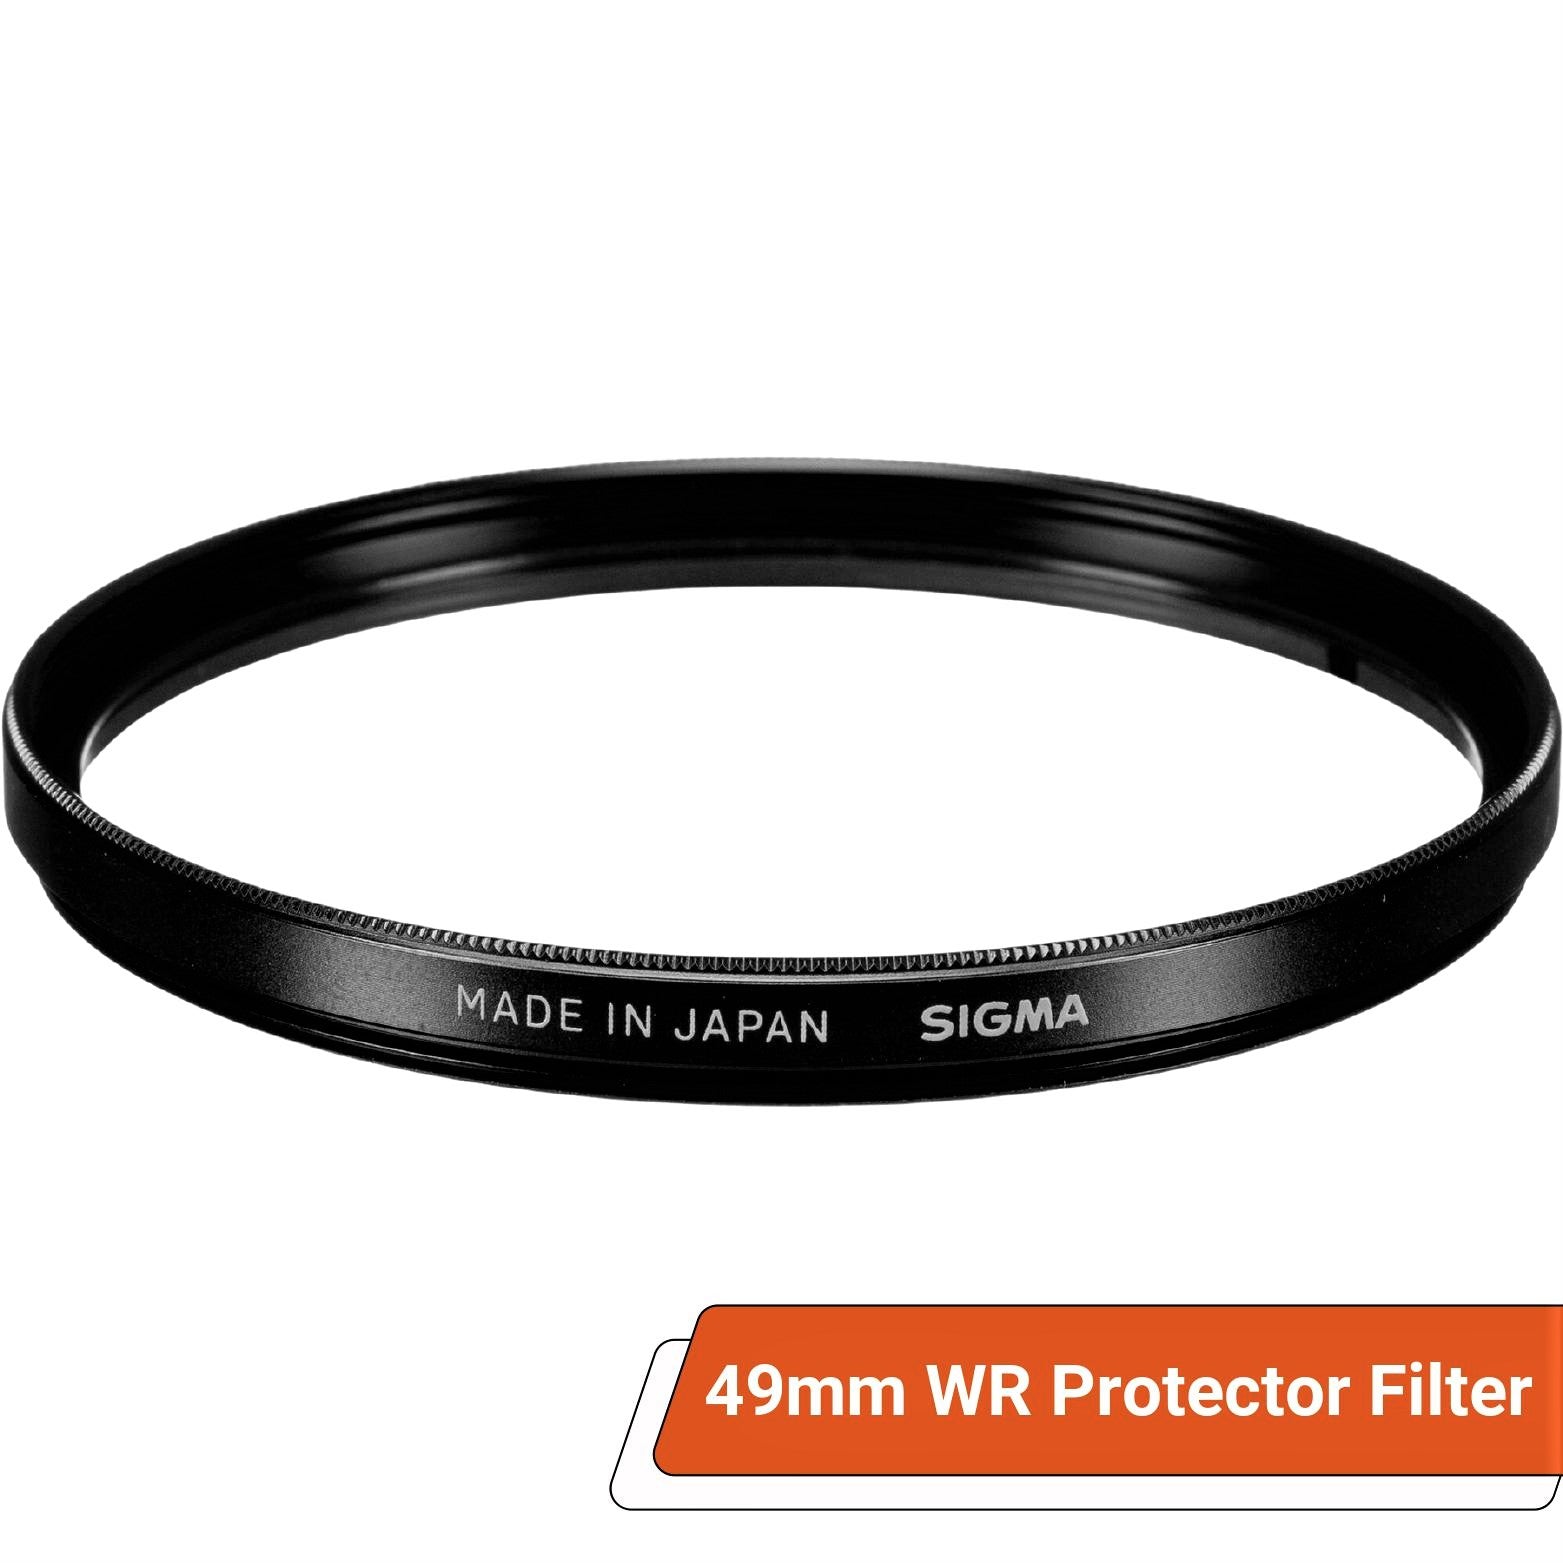 Sigma 49mm WR (Water Repellent) Protector Filter